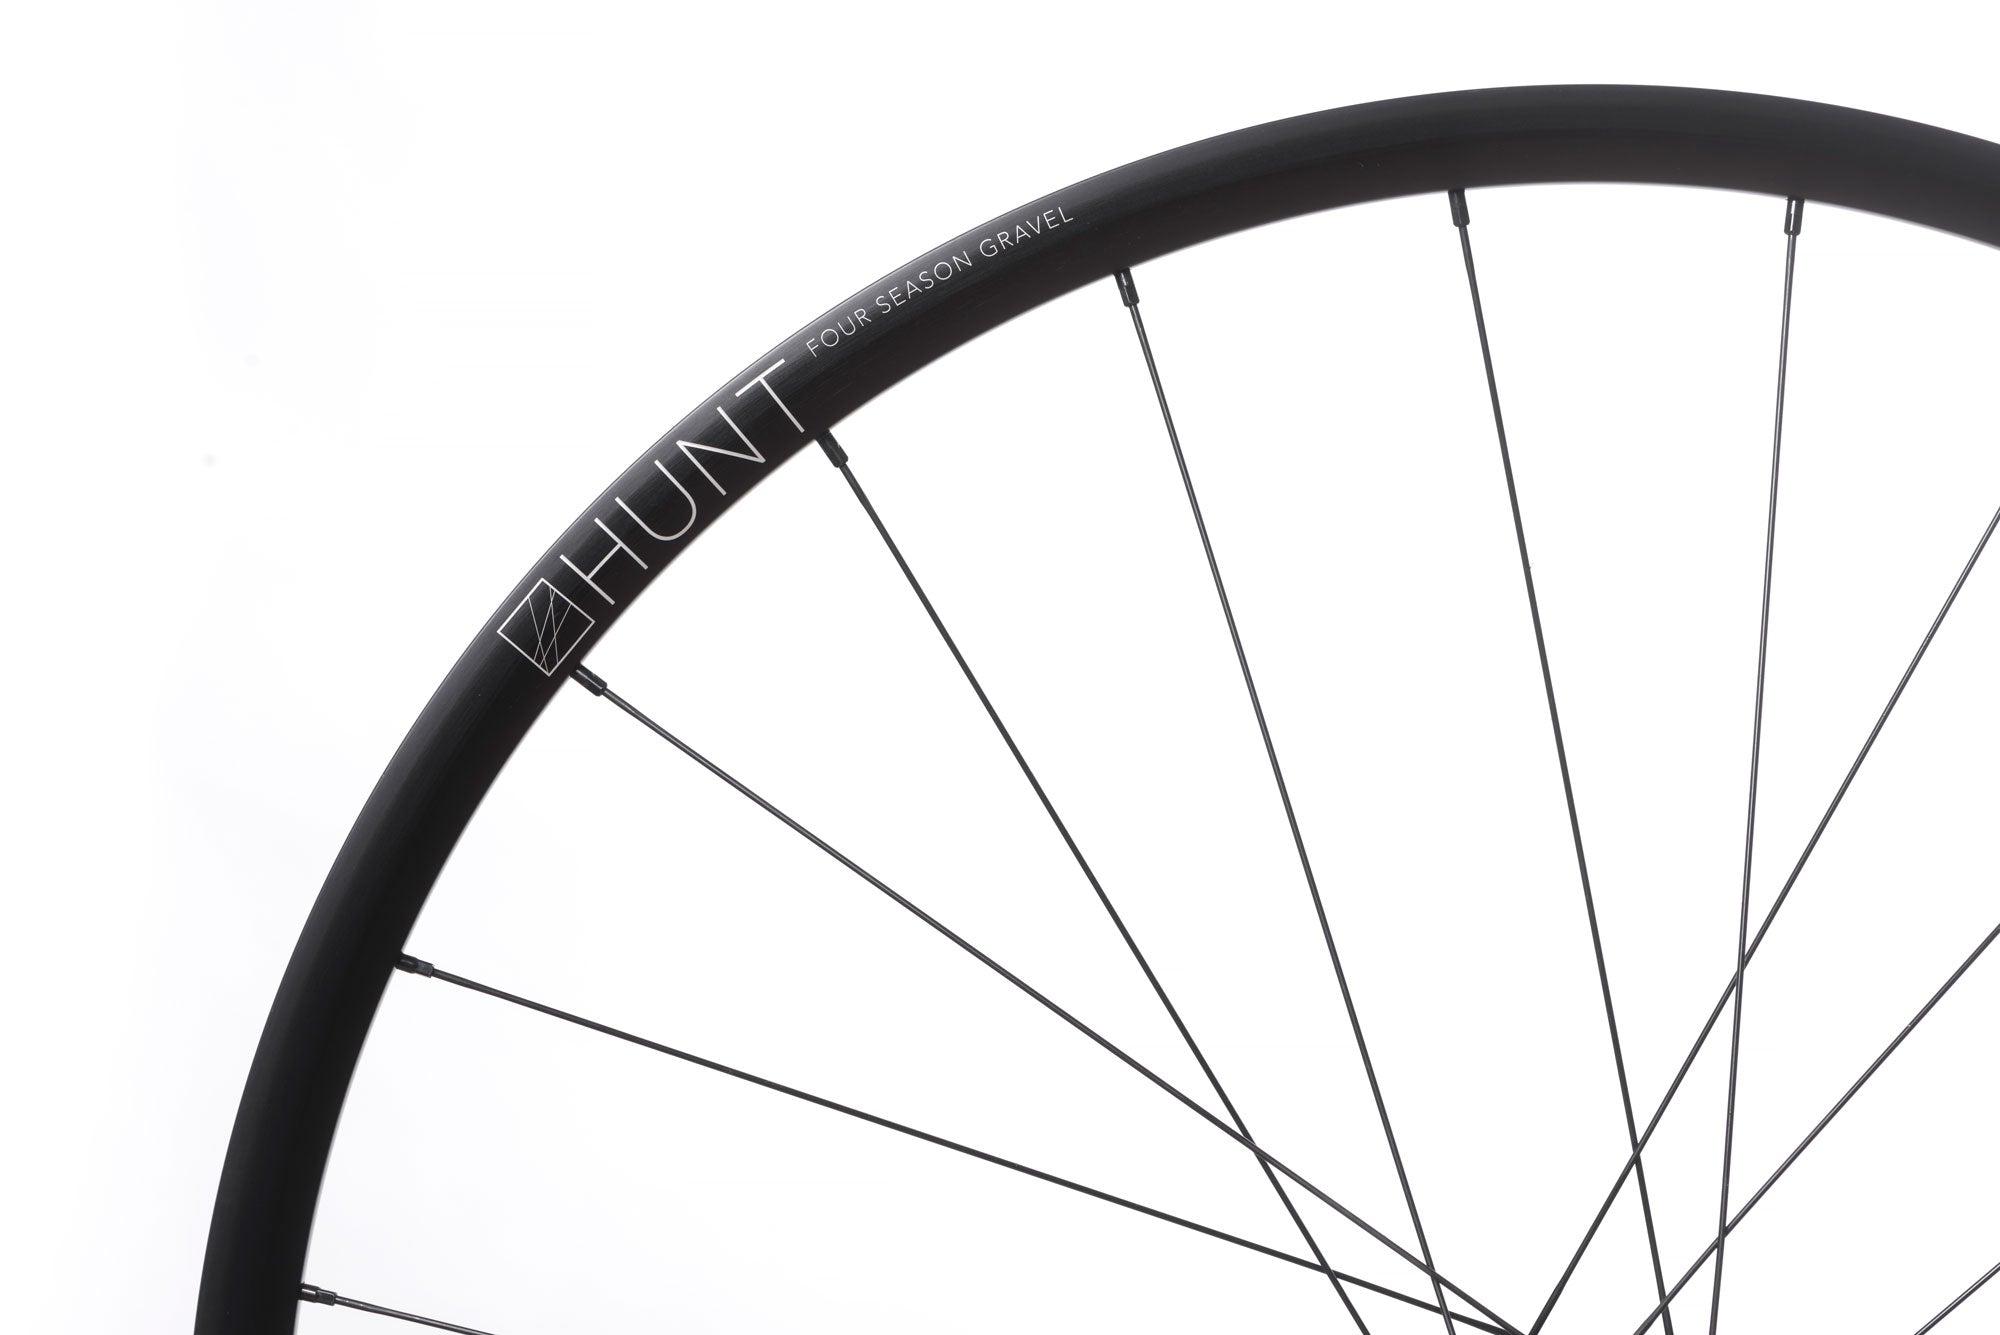 <h1>SPOKES</h1> <i>We chose Pillar triple butted spokes, lighter and providing a greater degree of elasticity to maintain tensions and add fatigue resistance. The PSR J-bend spokes feature the 2.2 width at the spoke head providing more material in this high stress area. The nipples come with a square head so you can achieve precise tensioning. Combining these components well is key which is why all Hunt wheels are hand-built.</i>